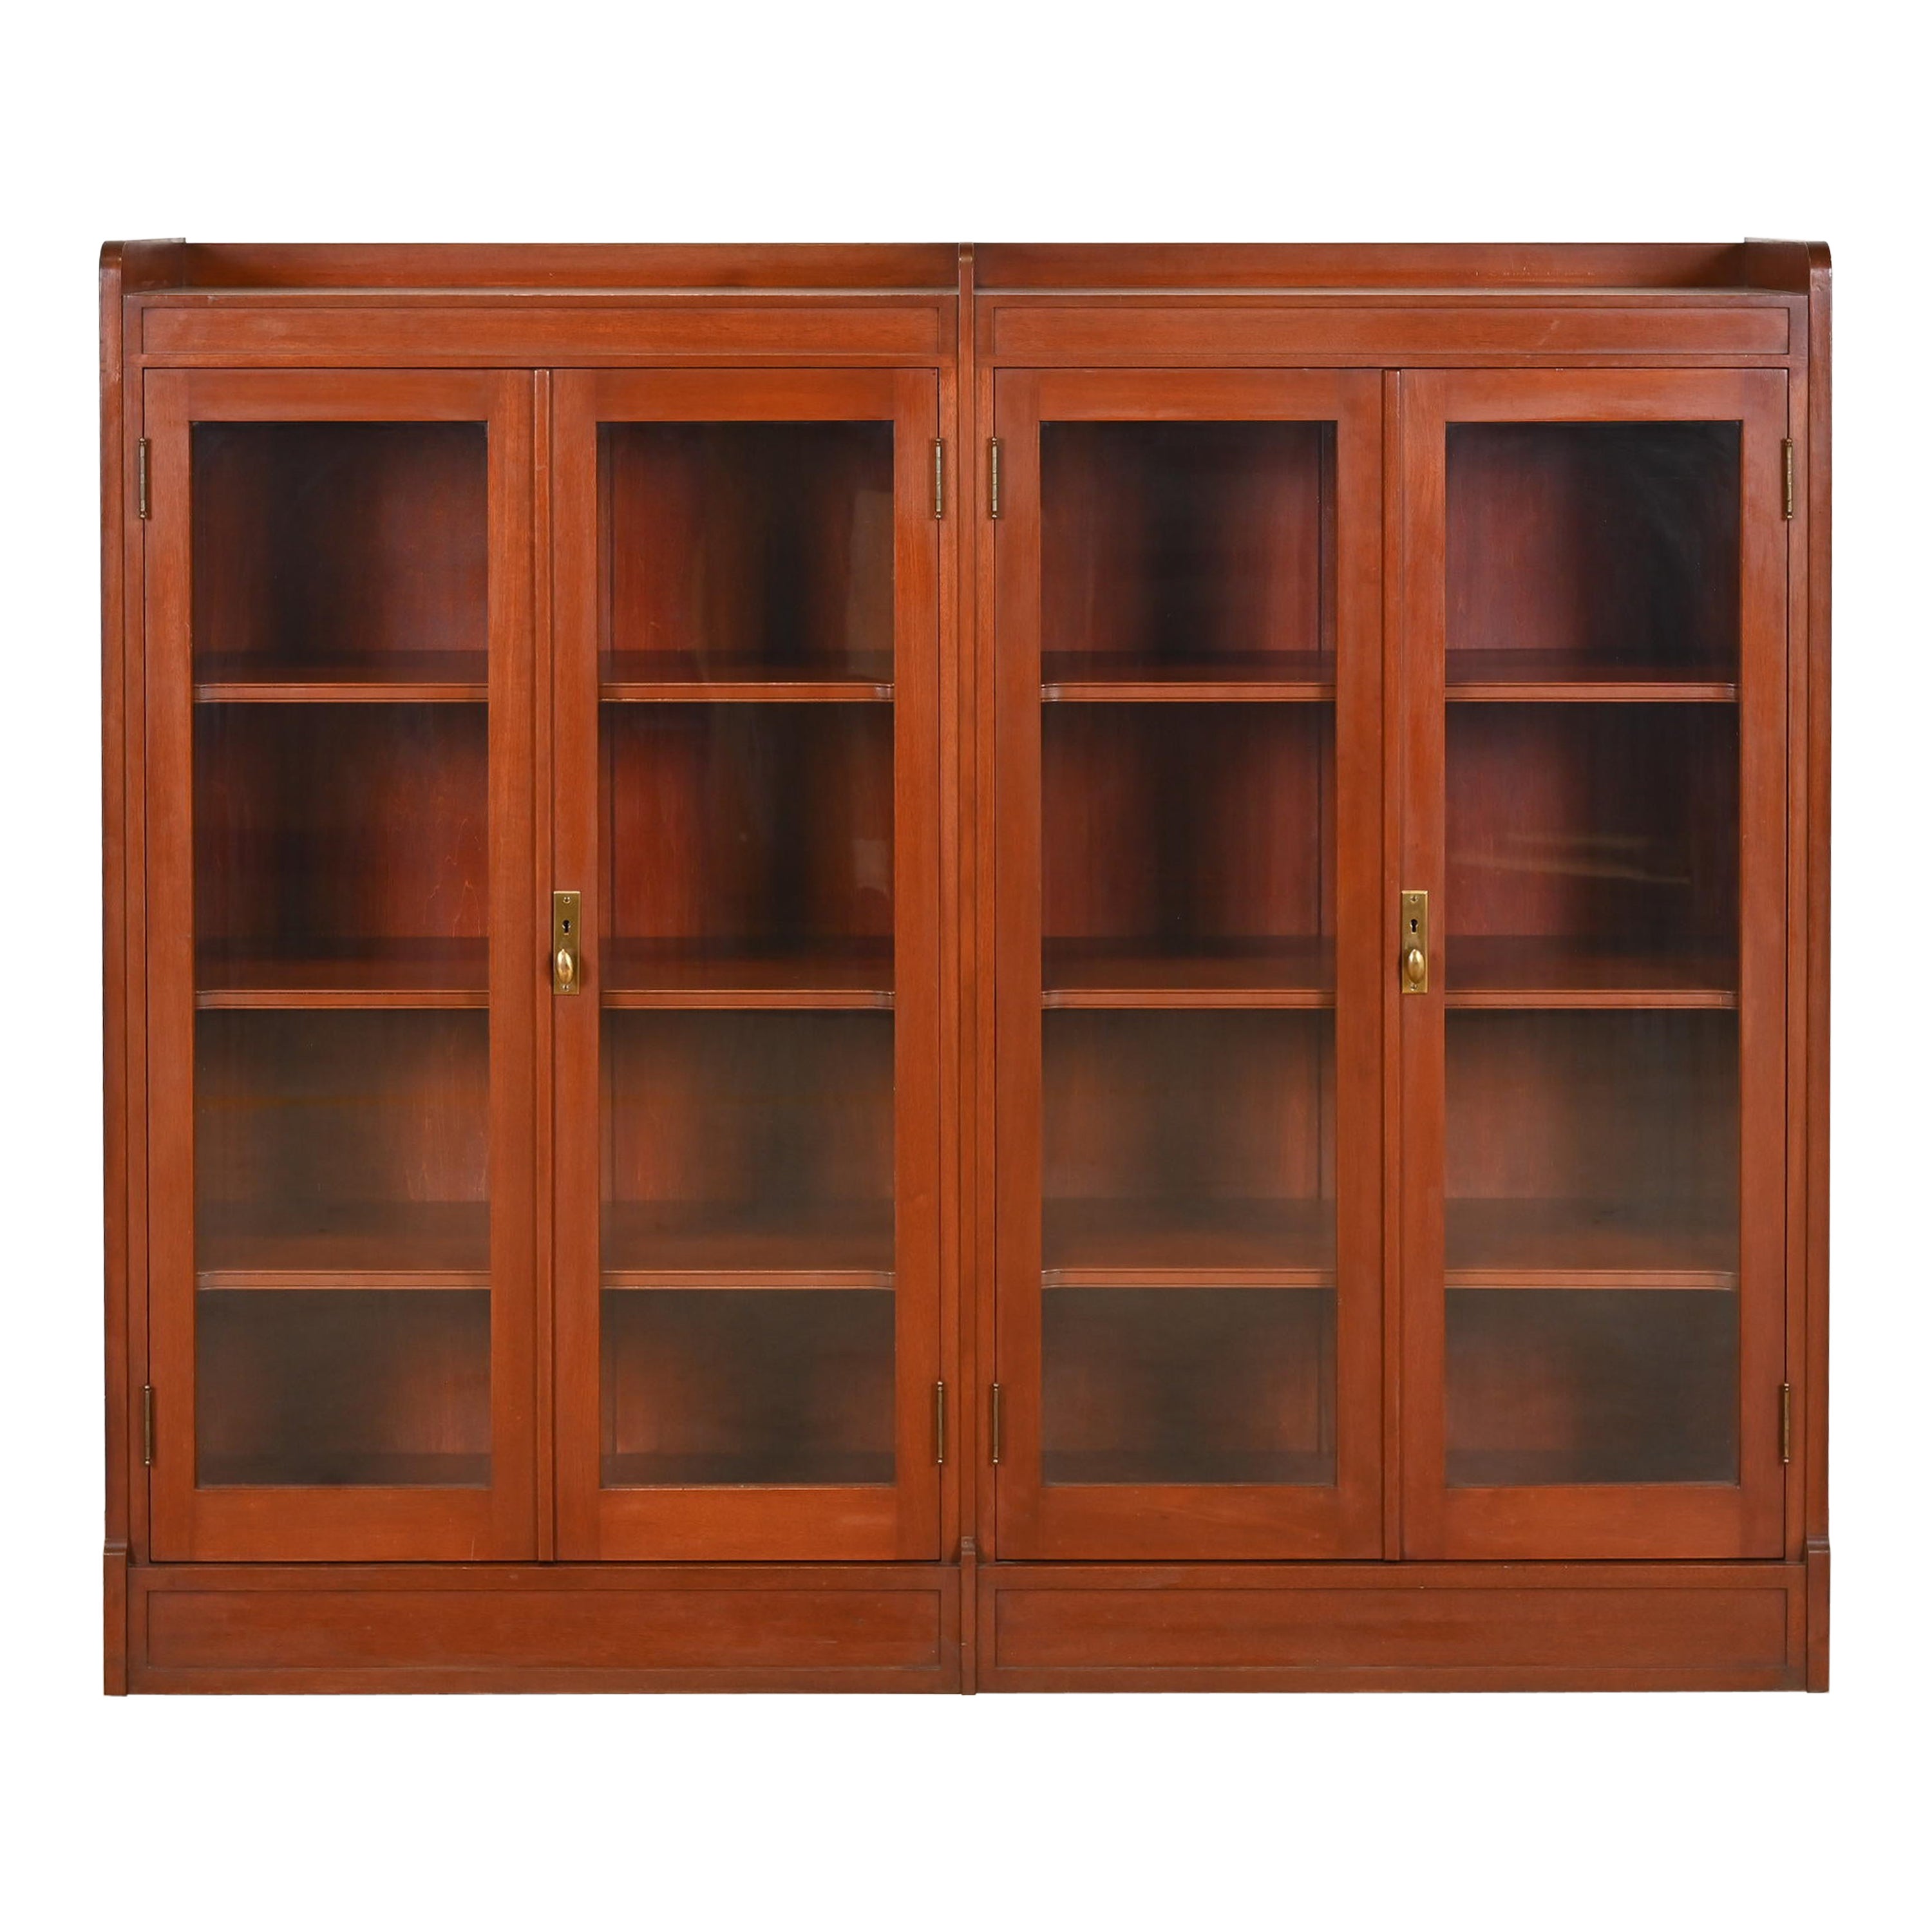 Antique Arts and Crafts Solid Mahogany Double Bookcase, Circa 1920s